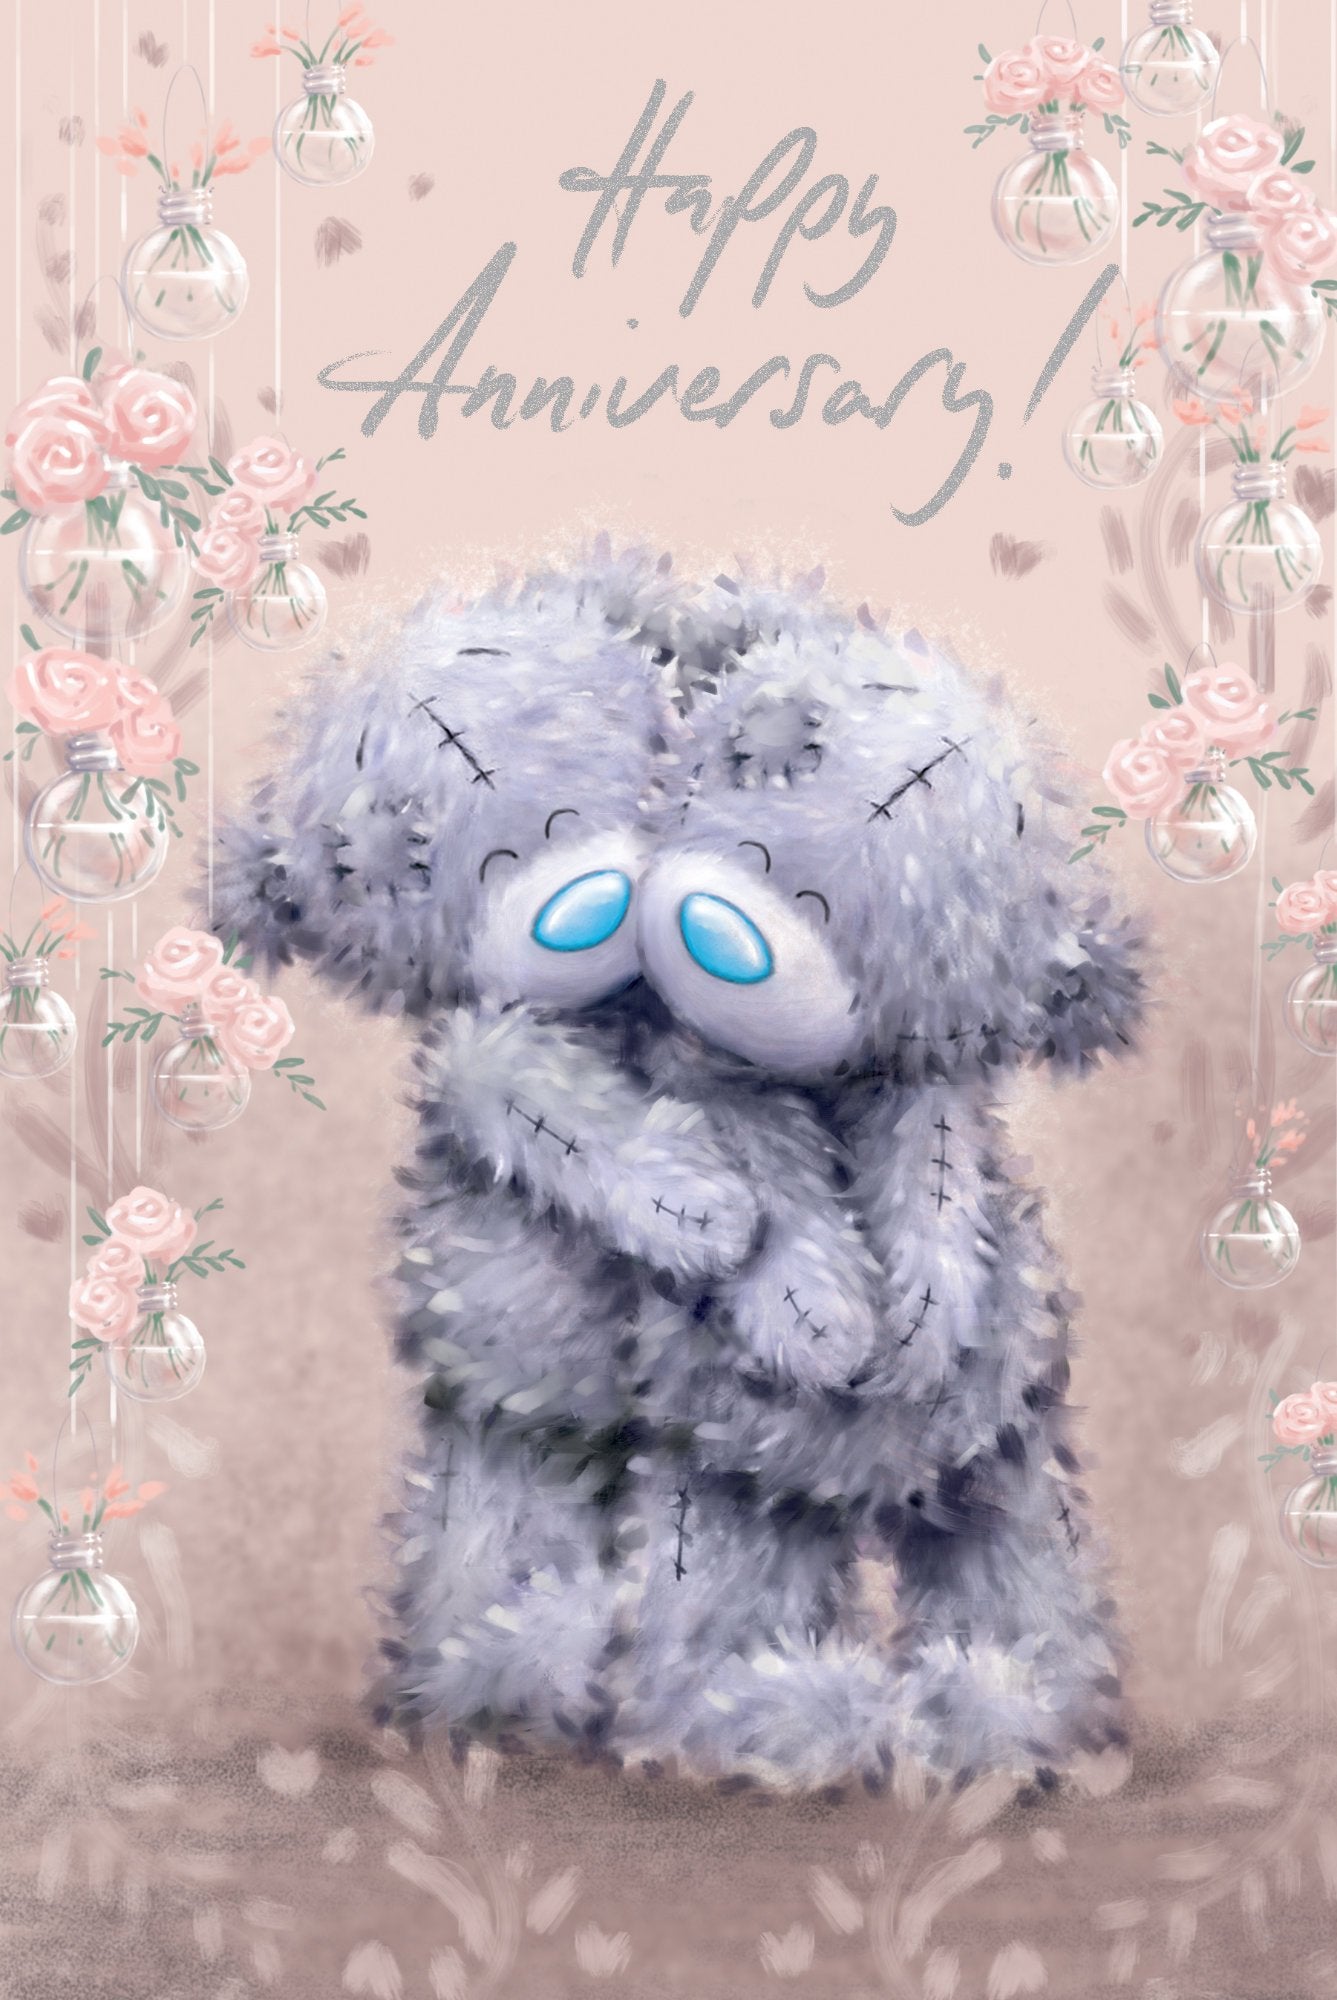 Photograph of Happy Anniversary Teddies Love Greetings Card at Nicole's Shop